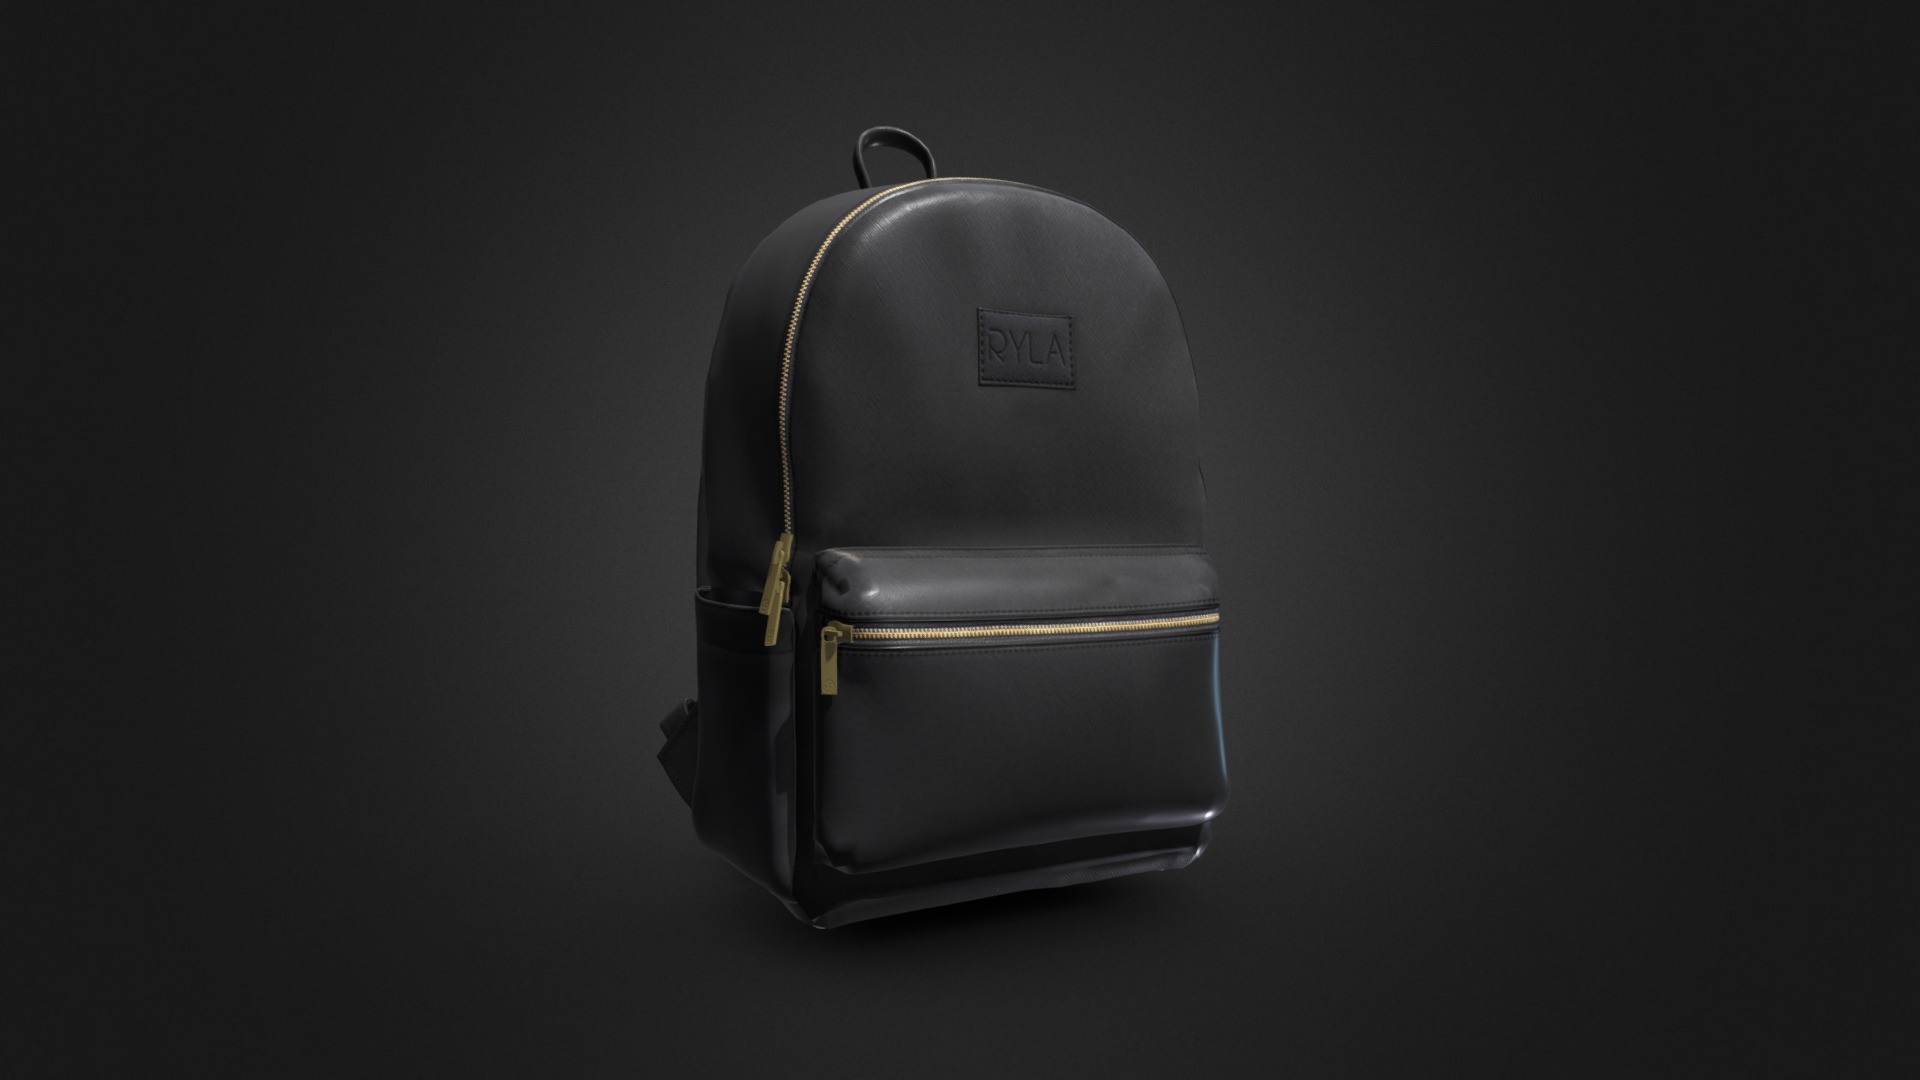 3D model Just Black - This is a 3D model of the Just Black. The 3D model is about a silver and black briefcase.